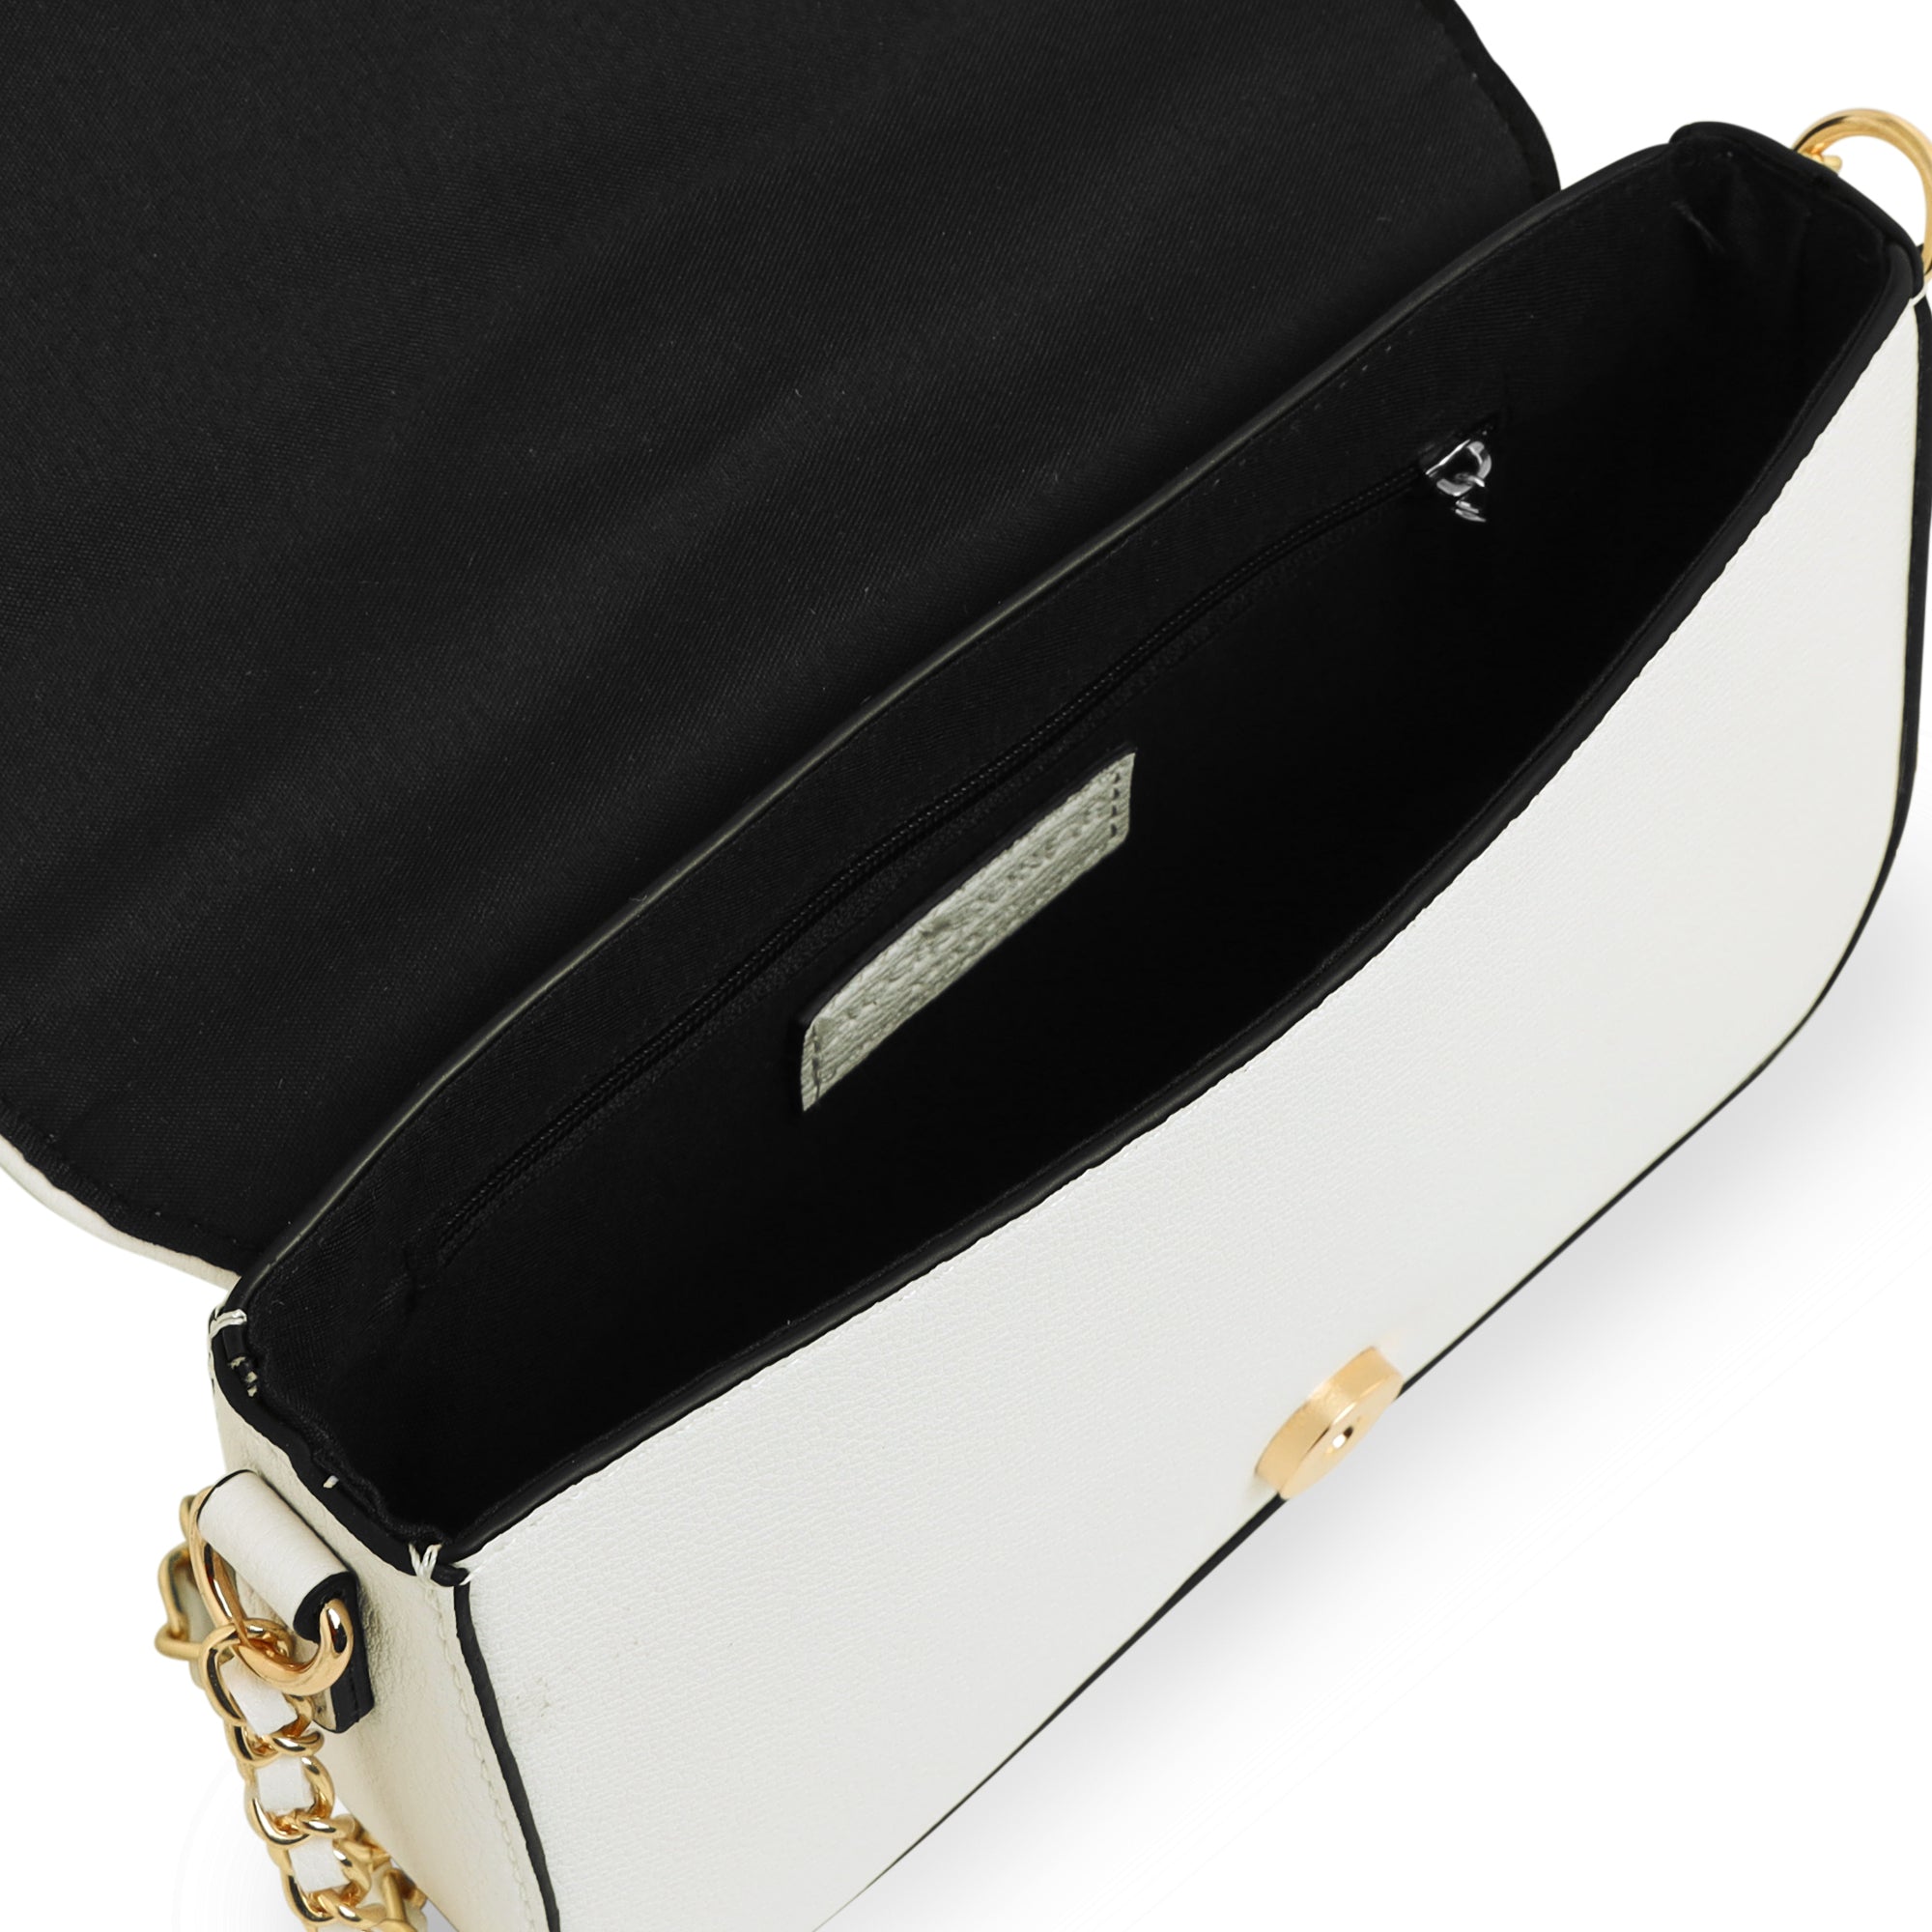 Accessorize London Women's Faux Leather White Chrissy quilt sling bag